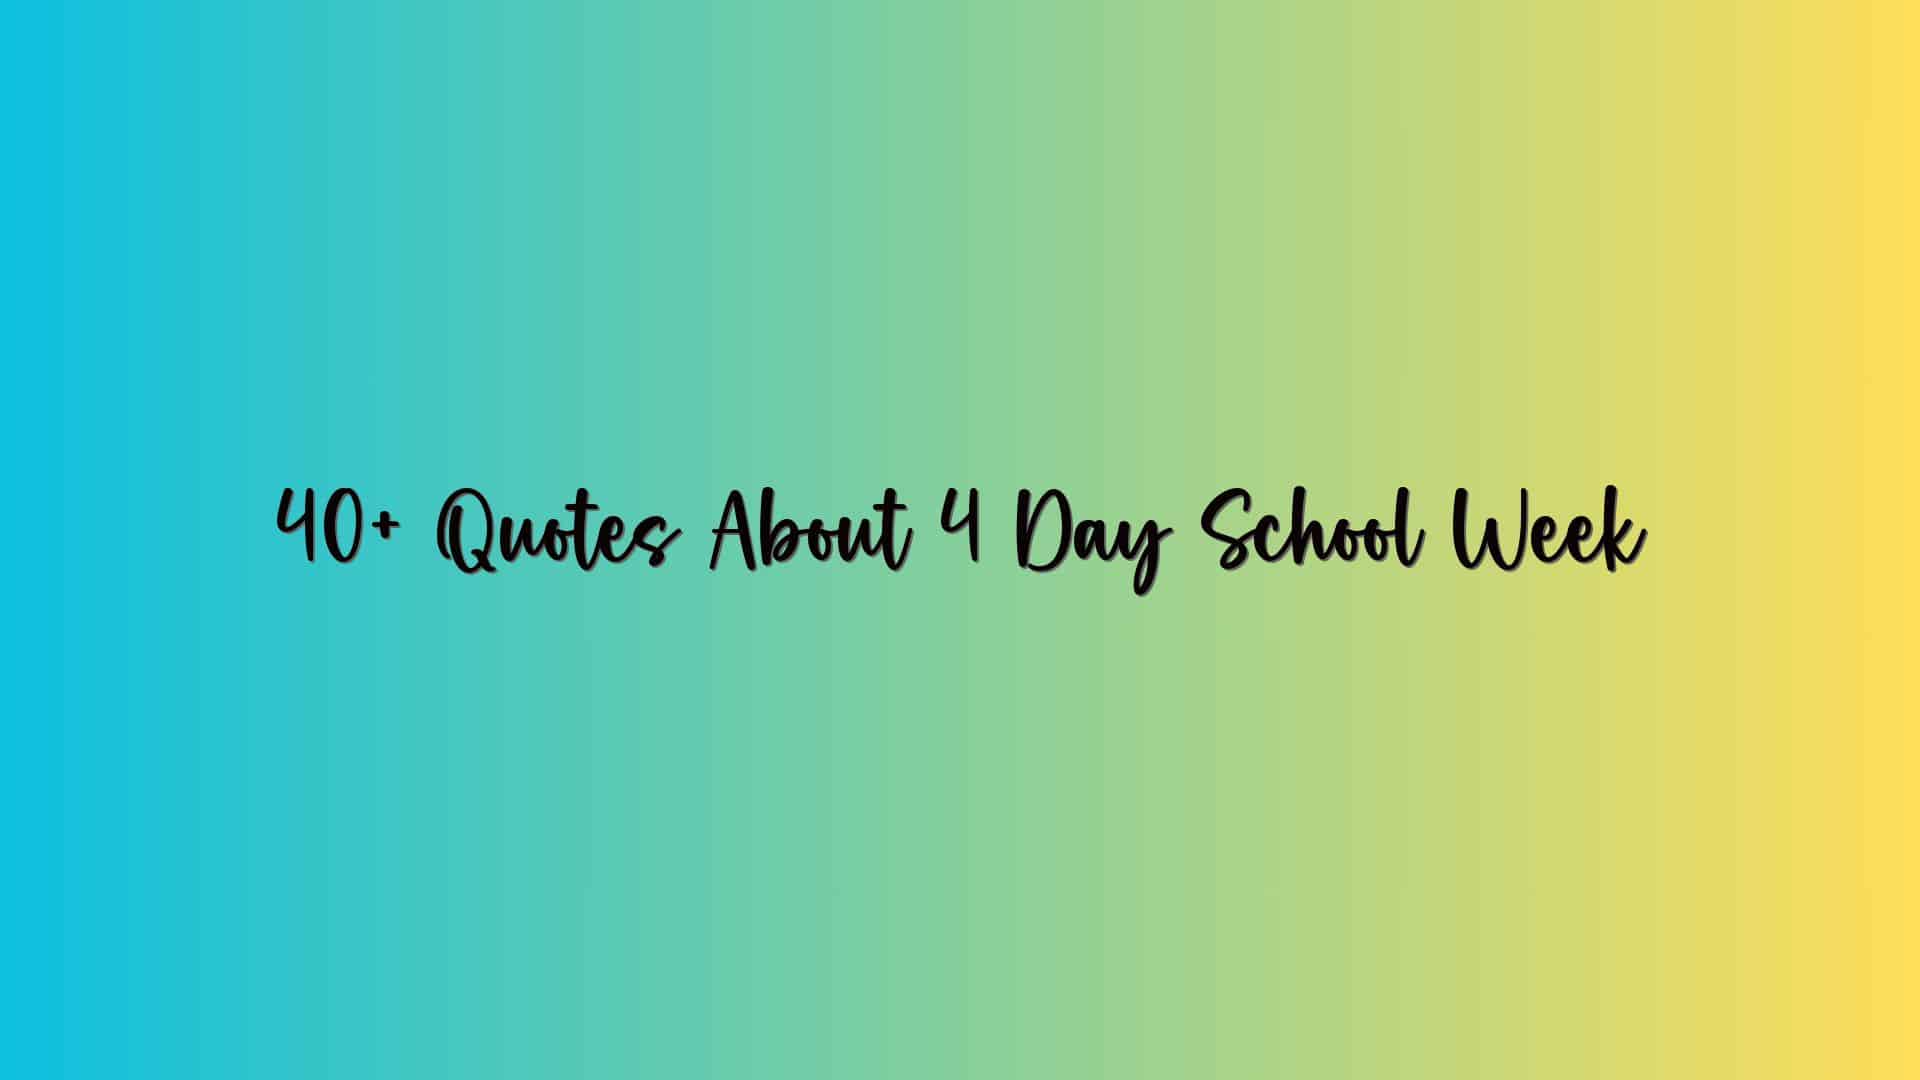 40+ Quotes About 4 Day School Week